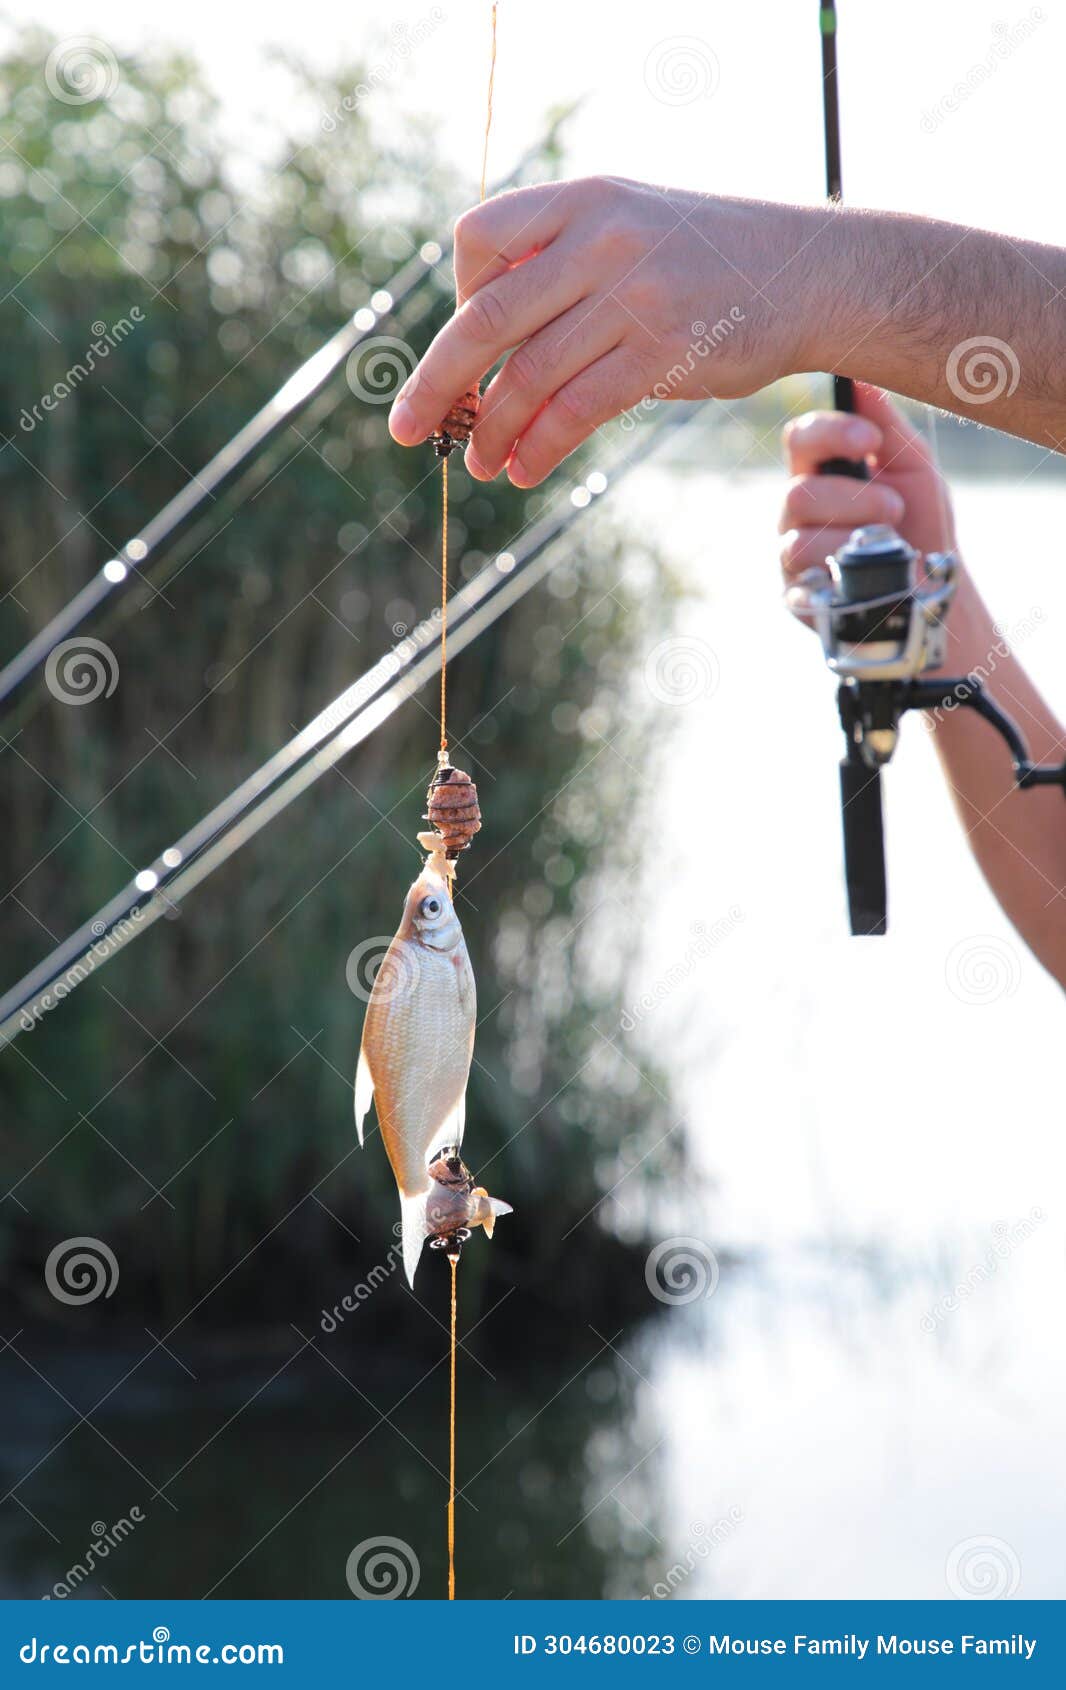 Caught Fish Hanging on Fishing Rod Close-up Photo, Lake in the Background,  Outdoors. Focus on Fish Stock Image - Image of catch, outdoor: 304680023